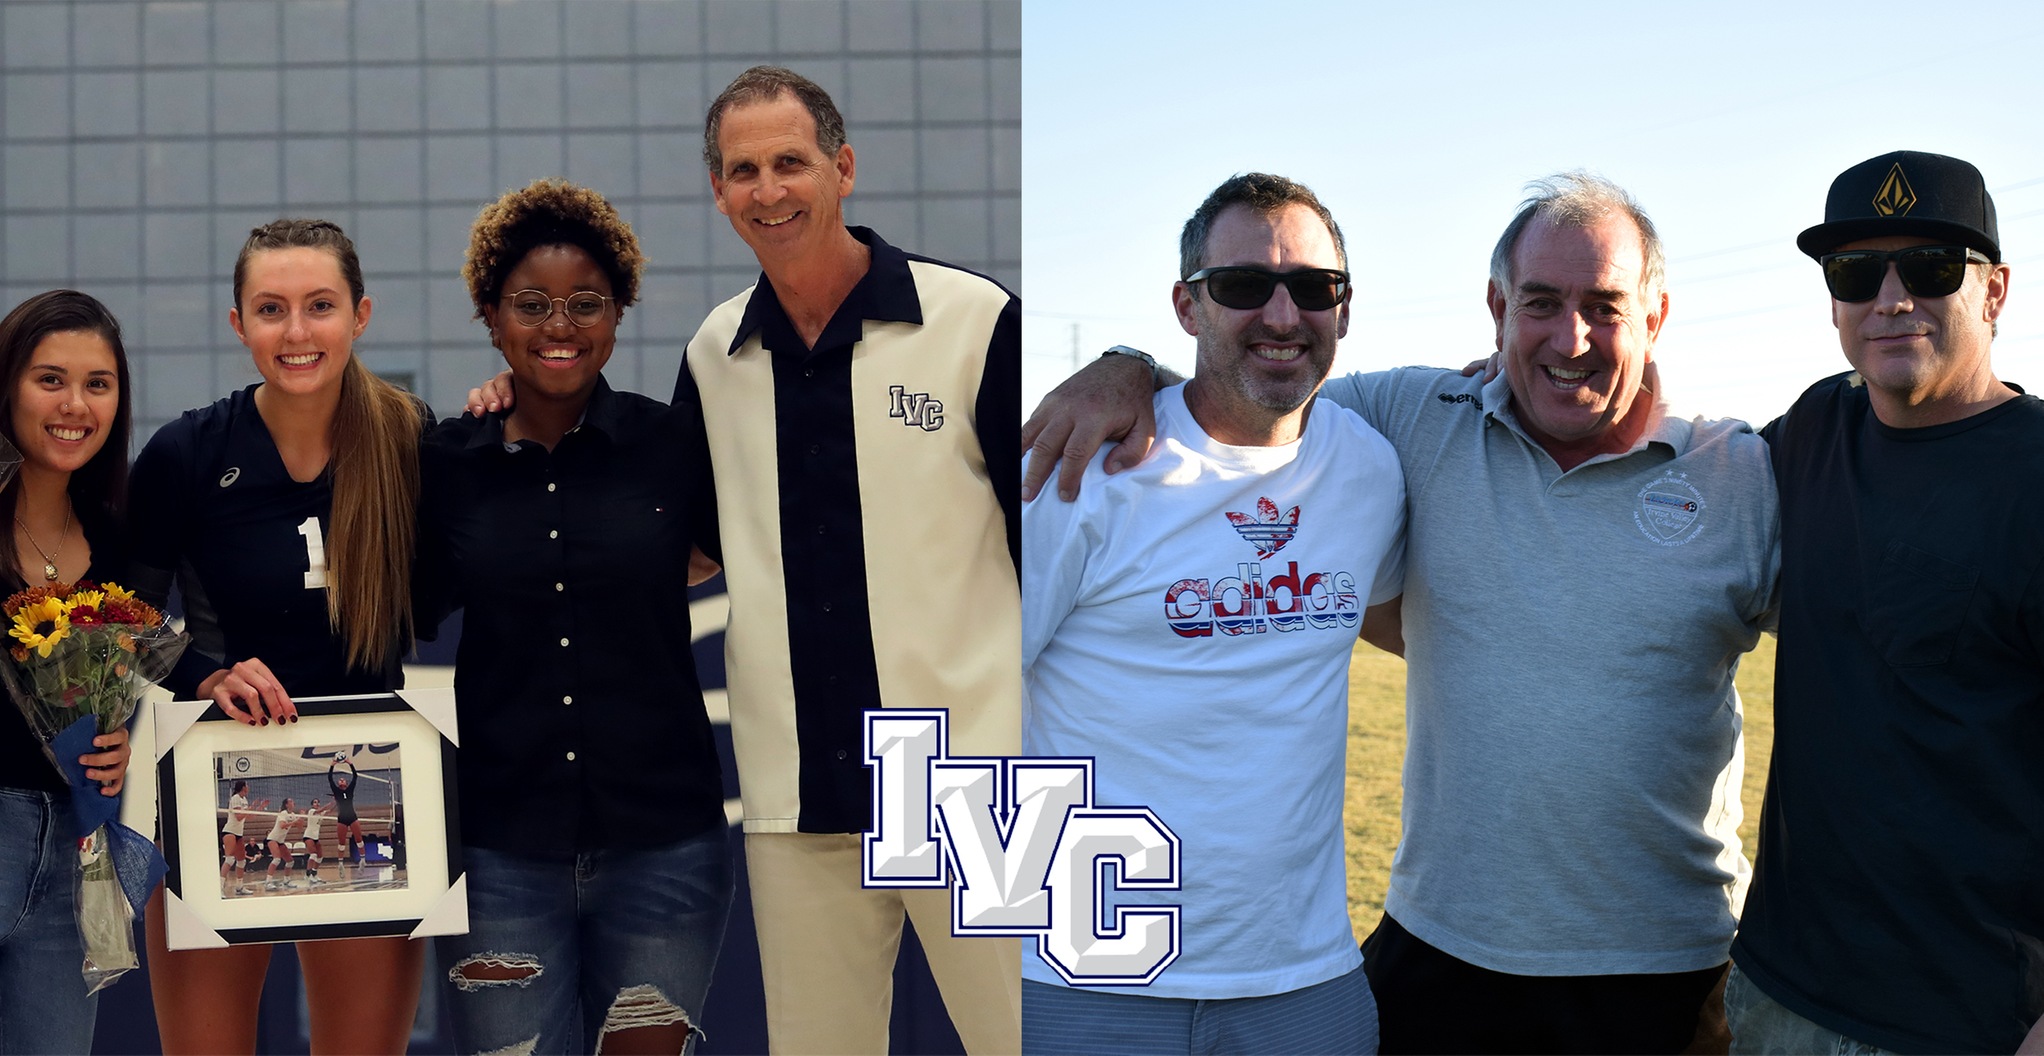 Pestolesi, McGrogan named IVC's coaches of the year for 19-20